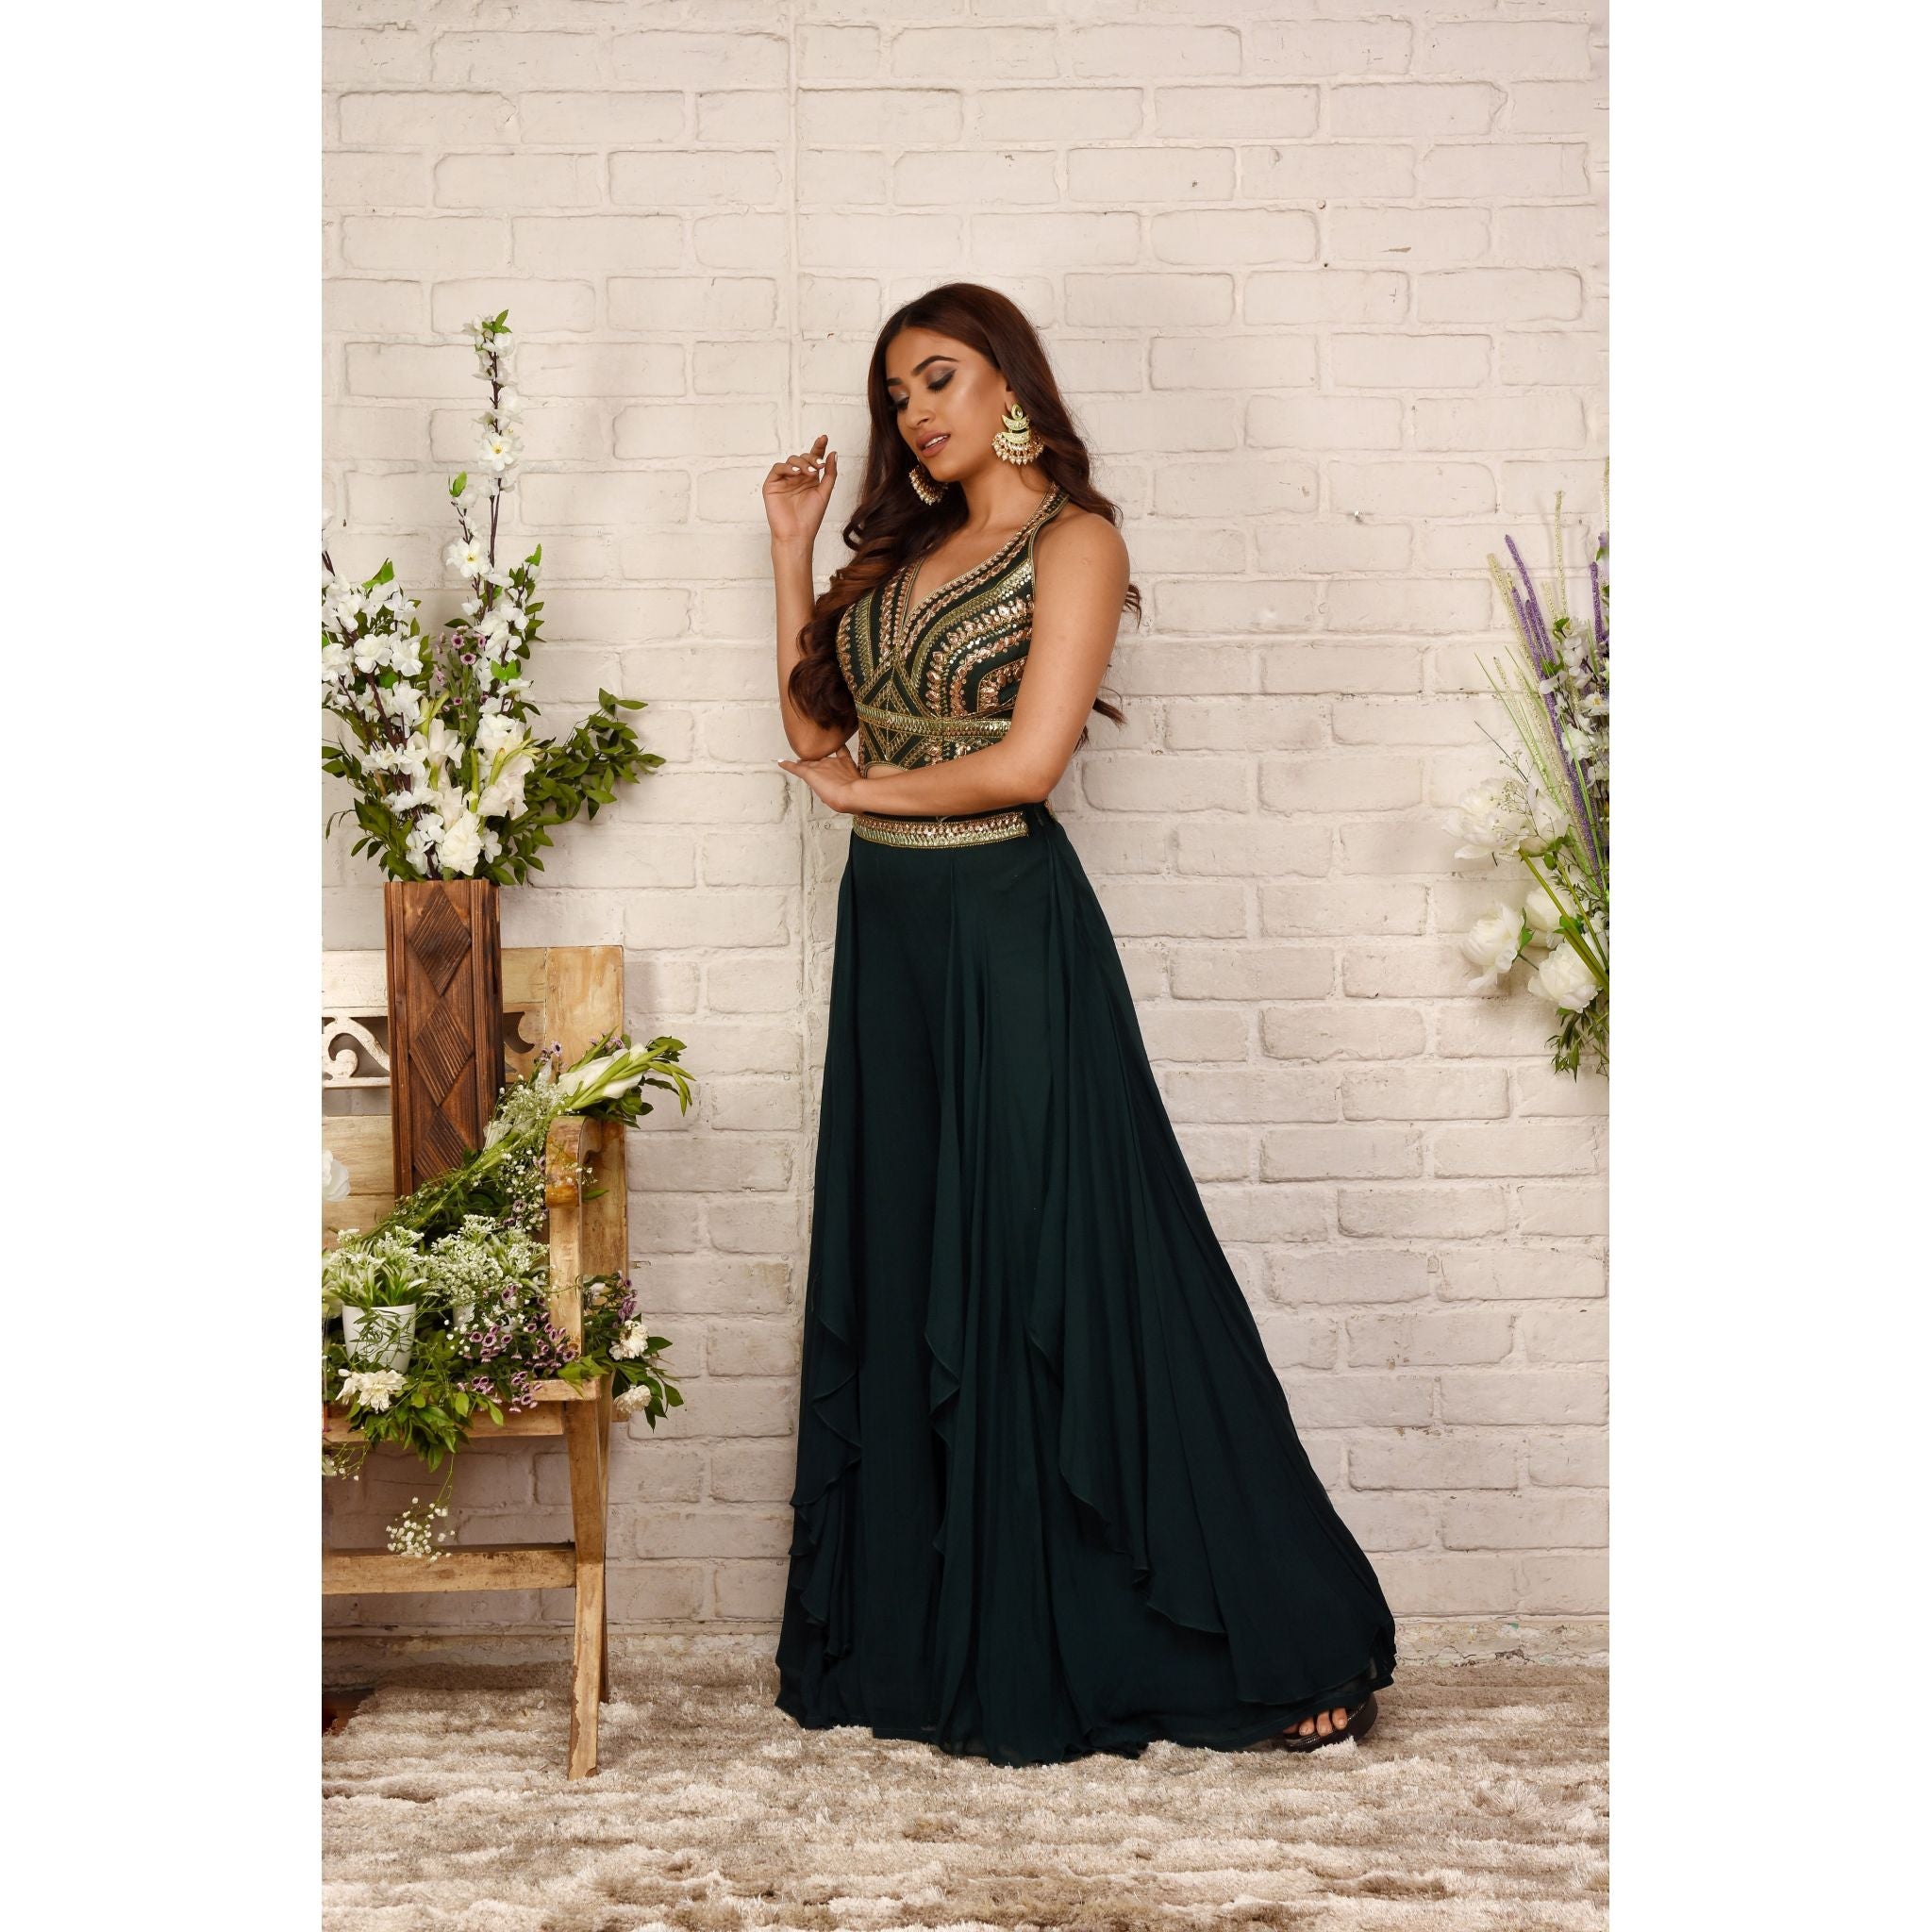 Emerald Green Plunge Top Palazzo Set - Indian Designer Bridal Wedding Outfit